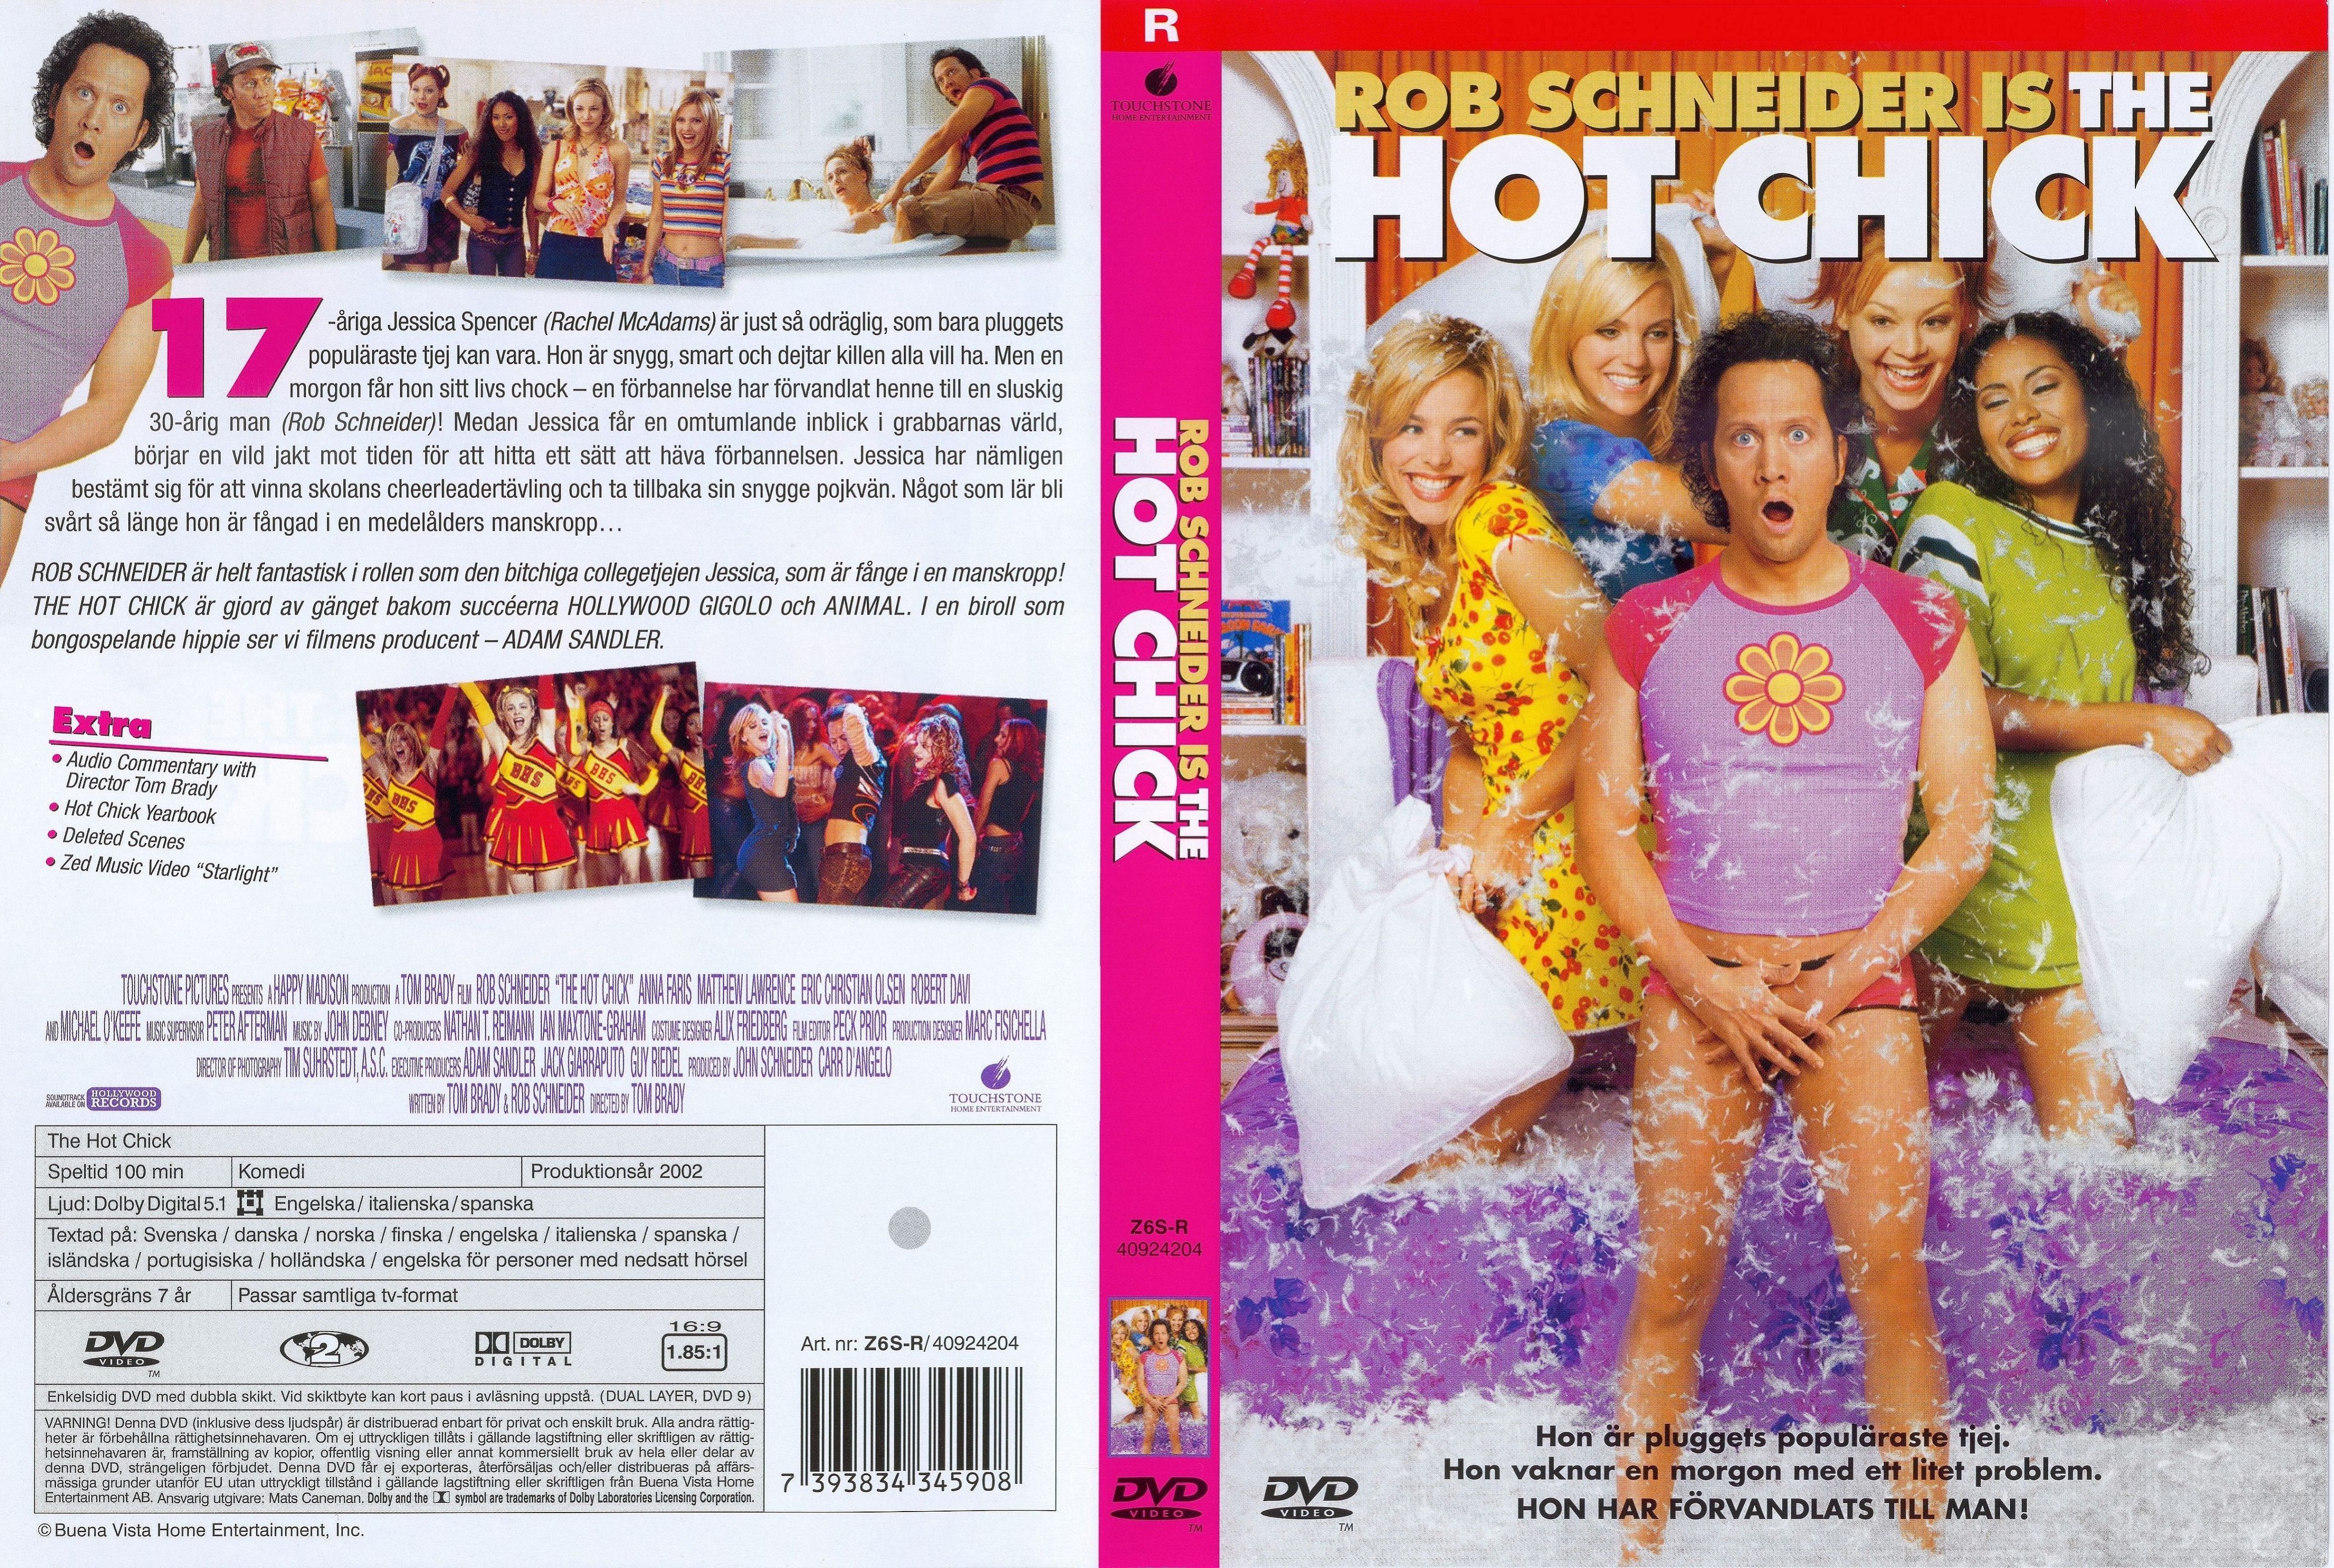 Covers Box Sk The Hot Chick 2002 High Quality Dvd Blueray Movie.